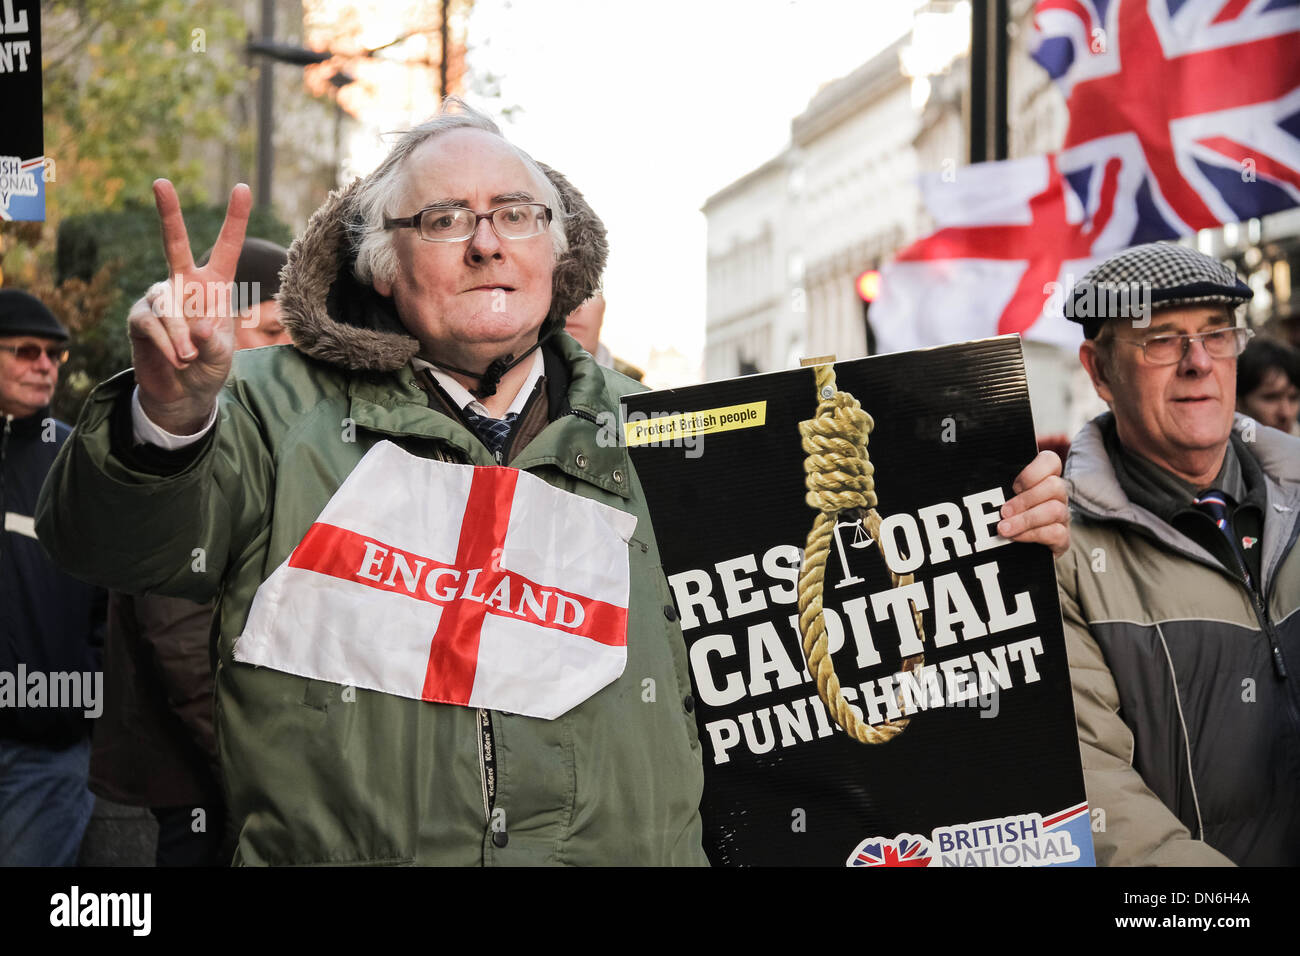 British National Party (BNP) supporters call for death penalty outside Old Bailey in London. Stock Photo